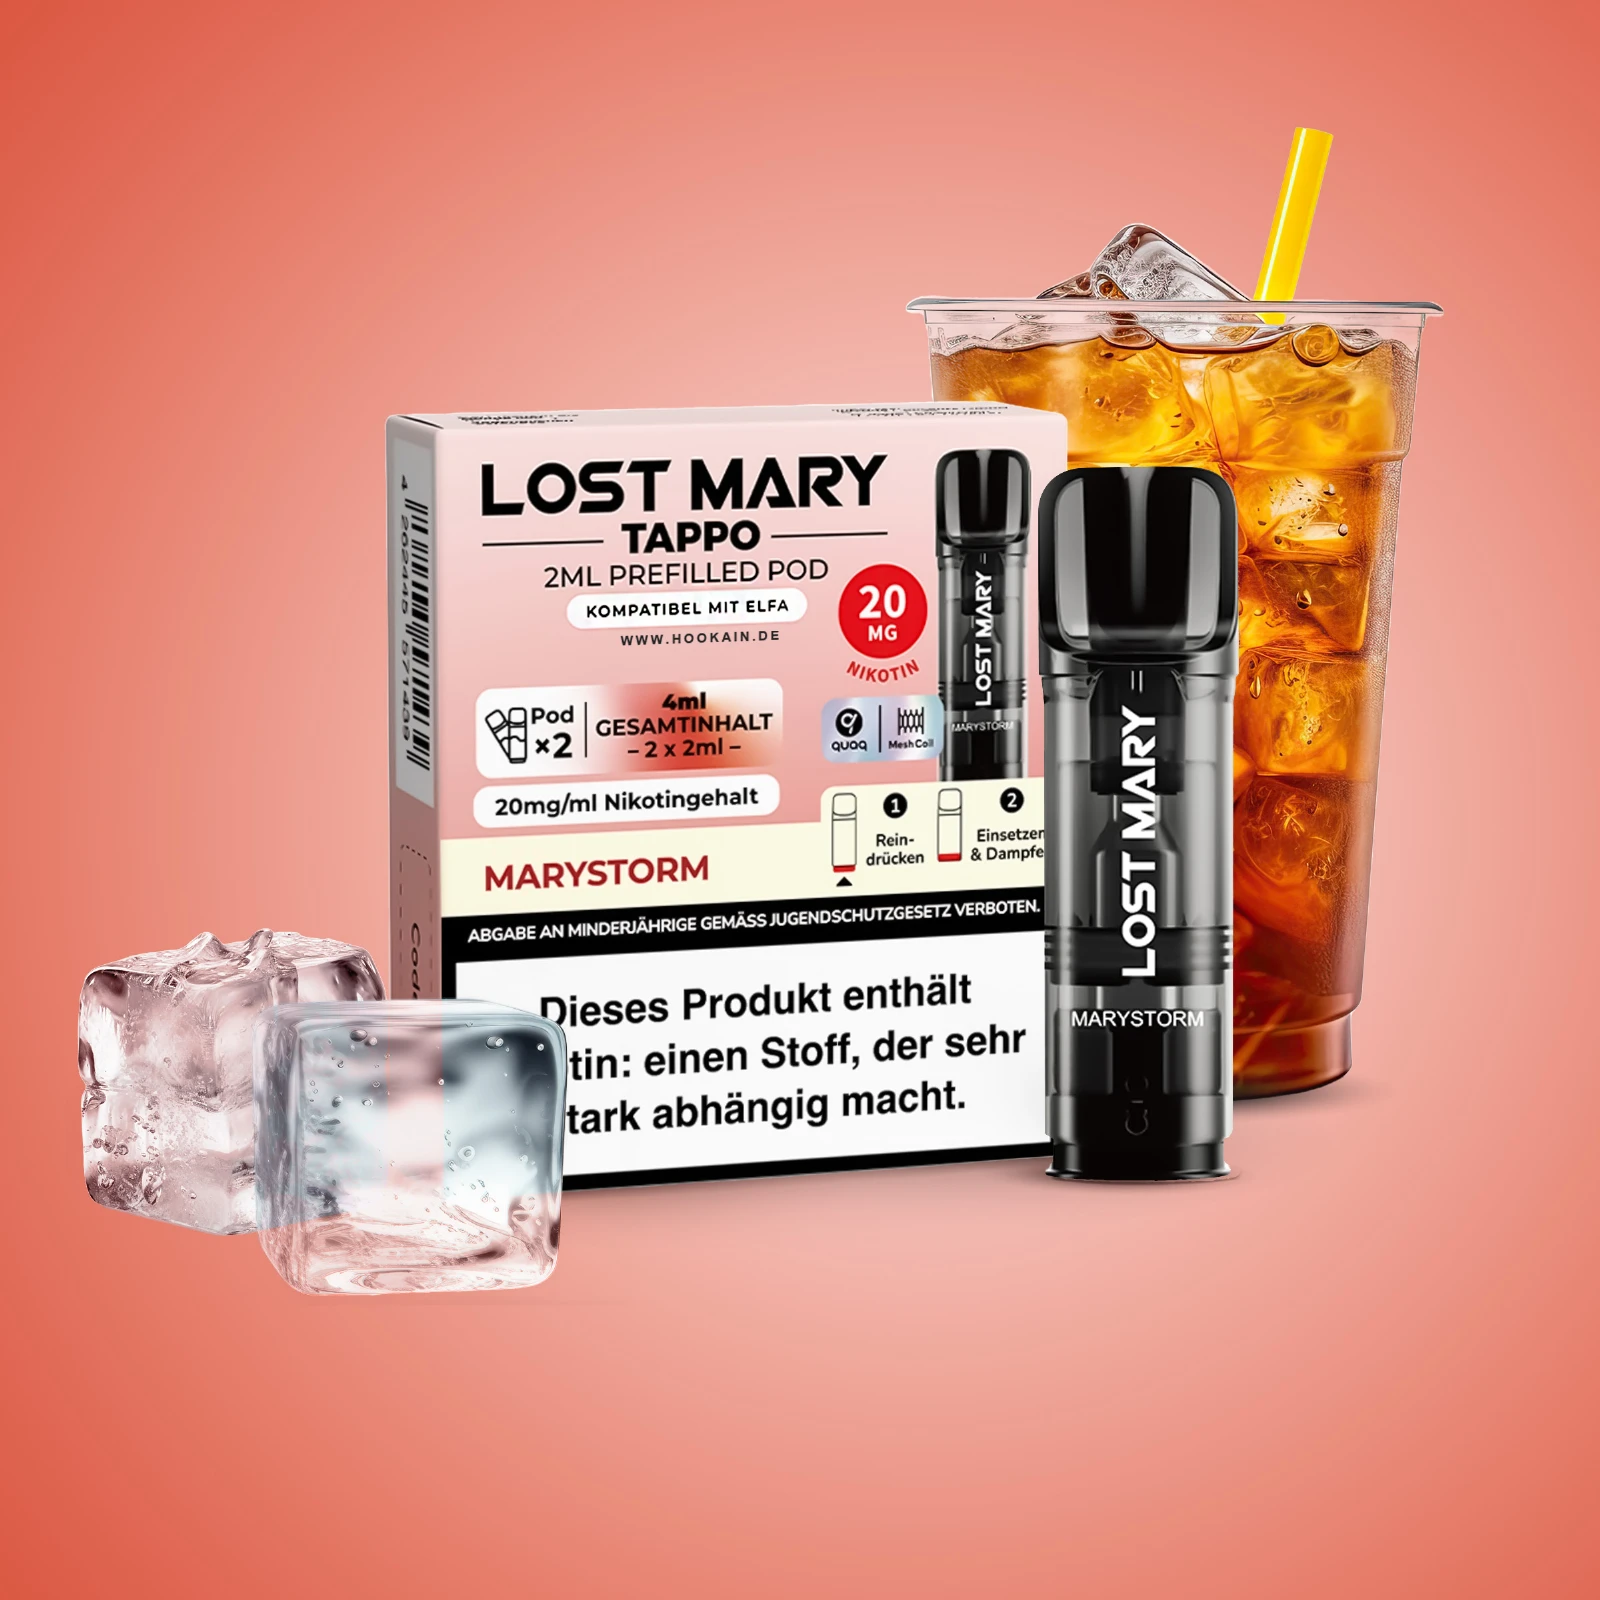 Lost Mary Tappo Marystorm: Umweltfreundliches Pod-System mit Prefilled Pods